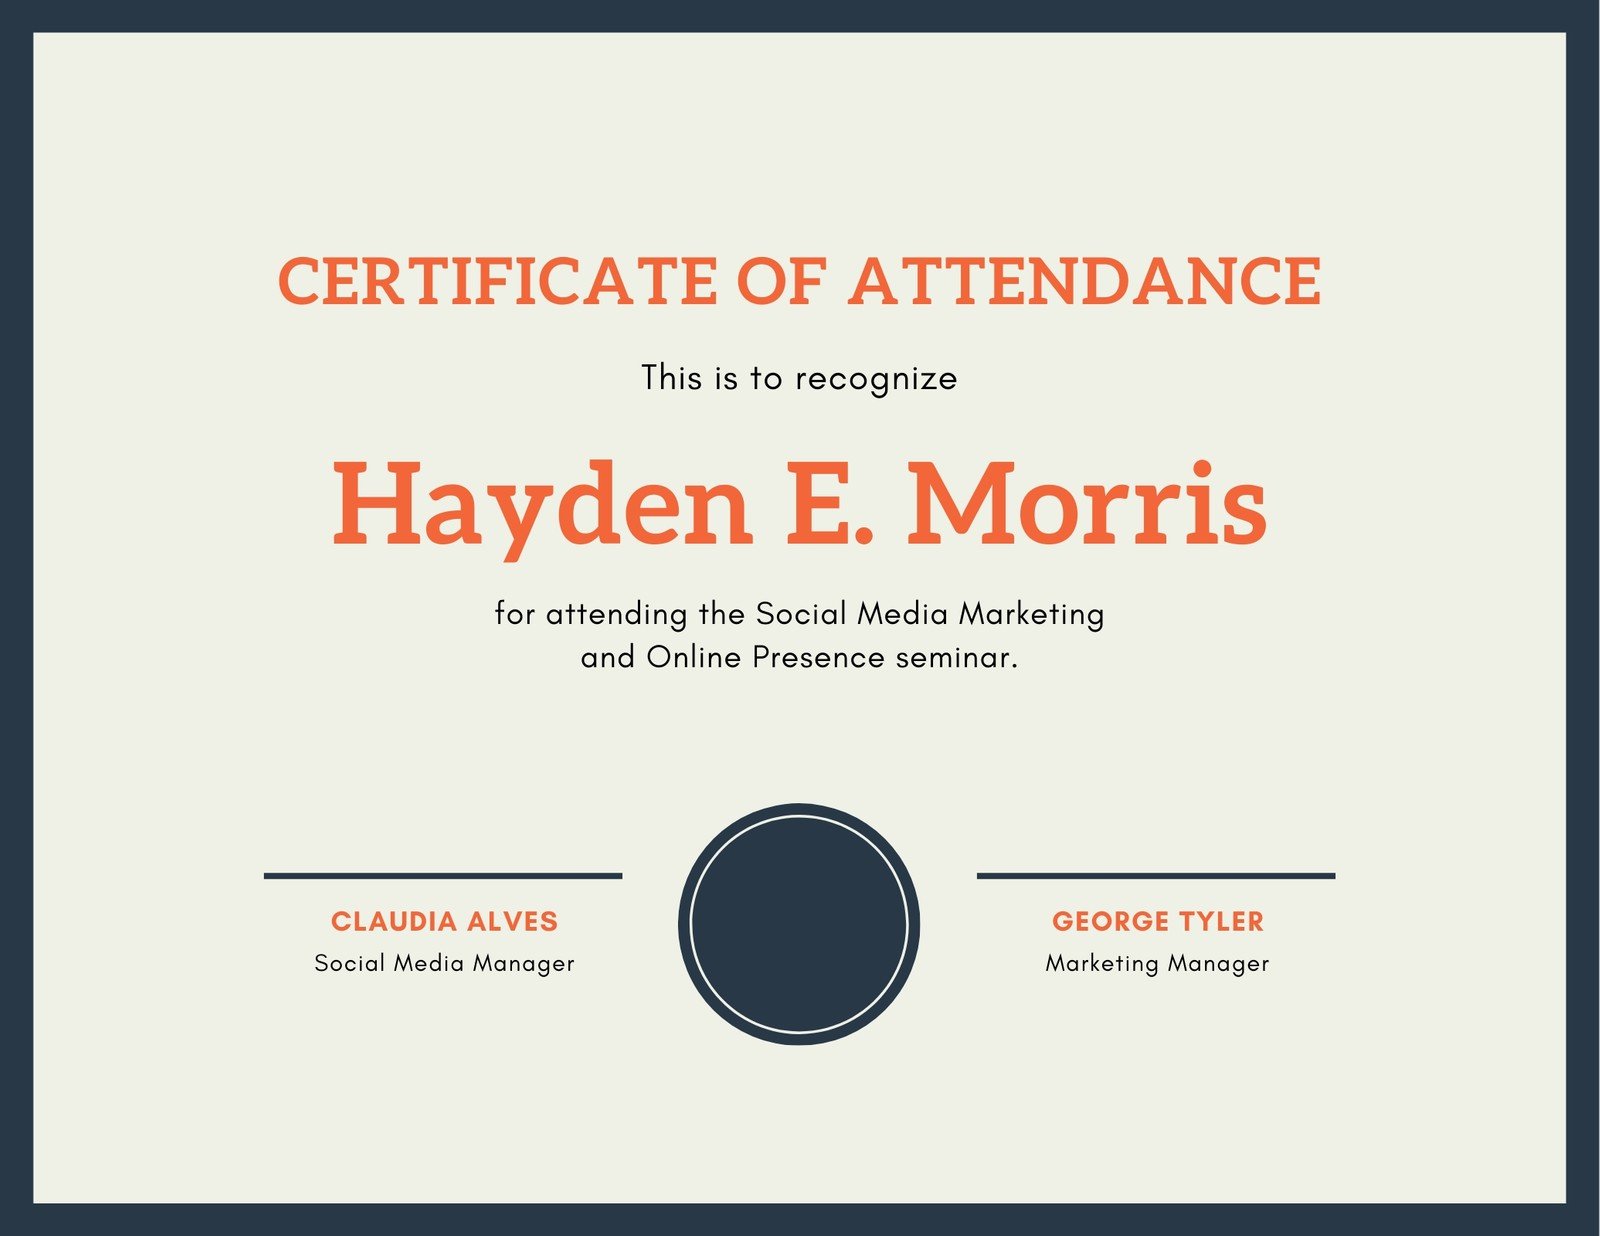 Customize 22+ Attendance Certificates Templates Online - Canva With Regard To Conference Certificate Of Attendance Template